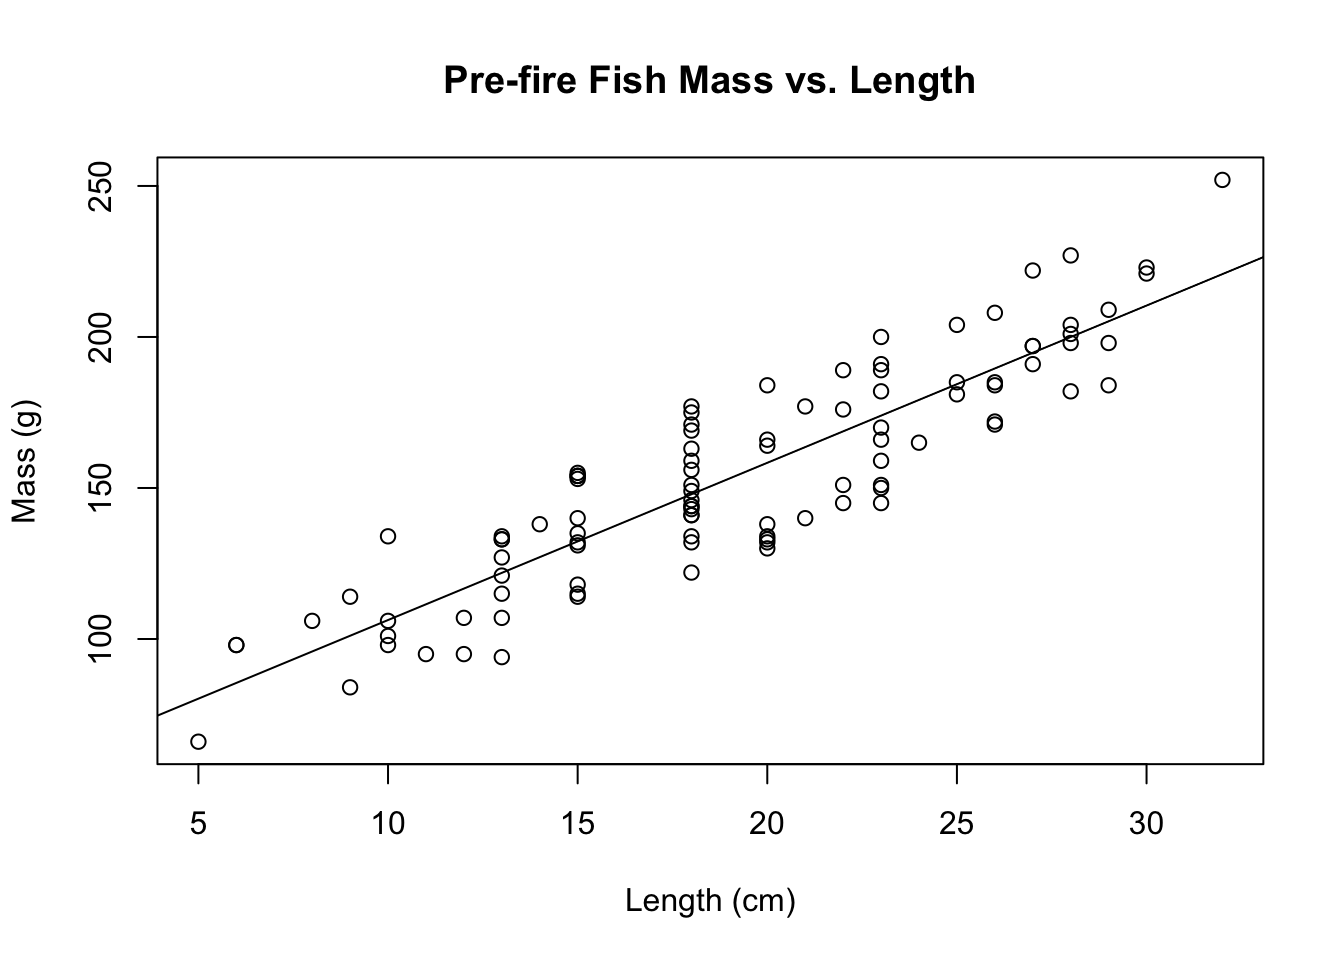 Scatterplot and linear regression line of fish length in centimeters versus fish mass in grams in Cache La Poudre in 2012 before the High Park Fire.